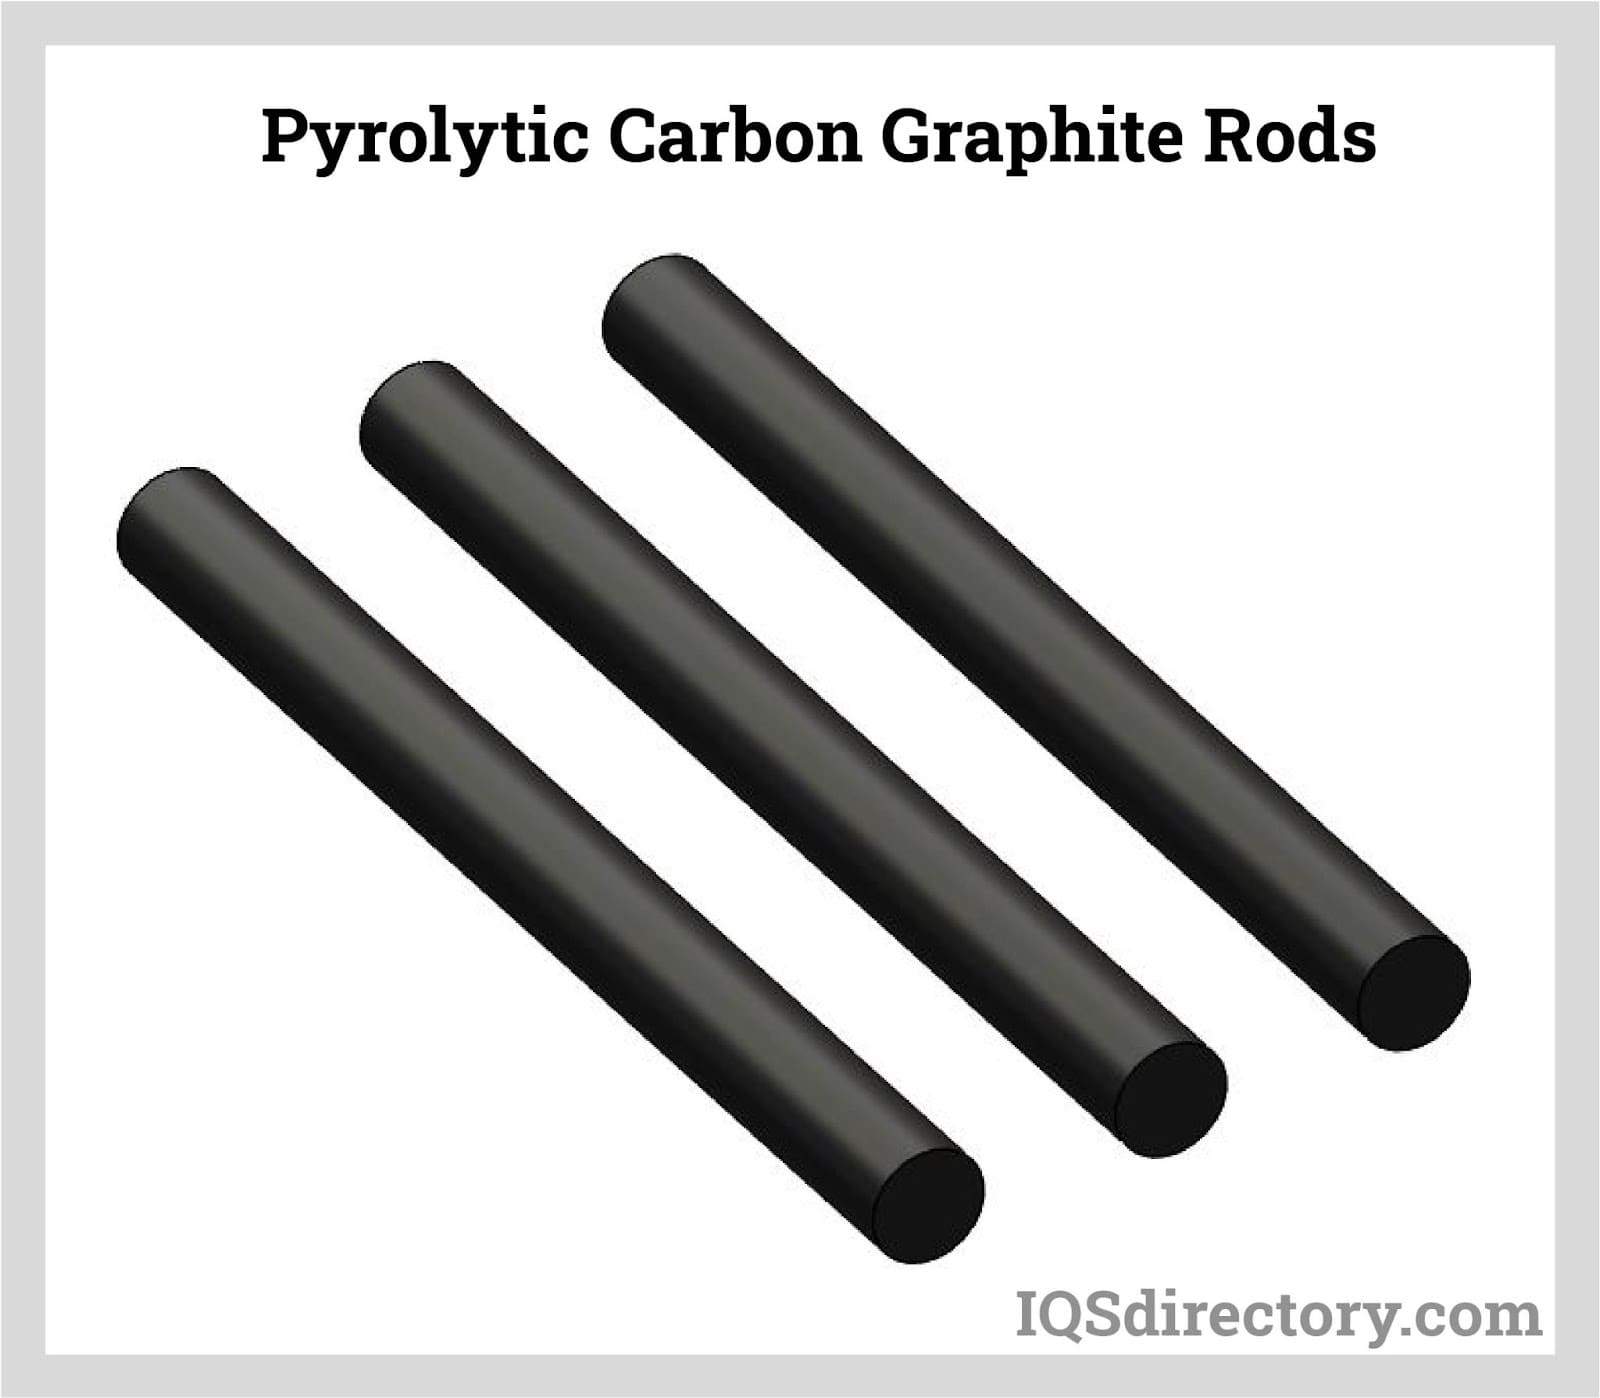 Pyrolytic Carbon Graphite Rods